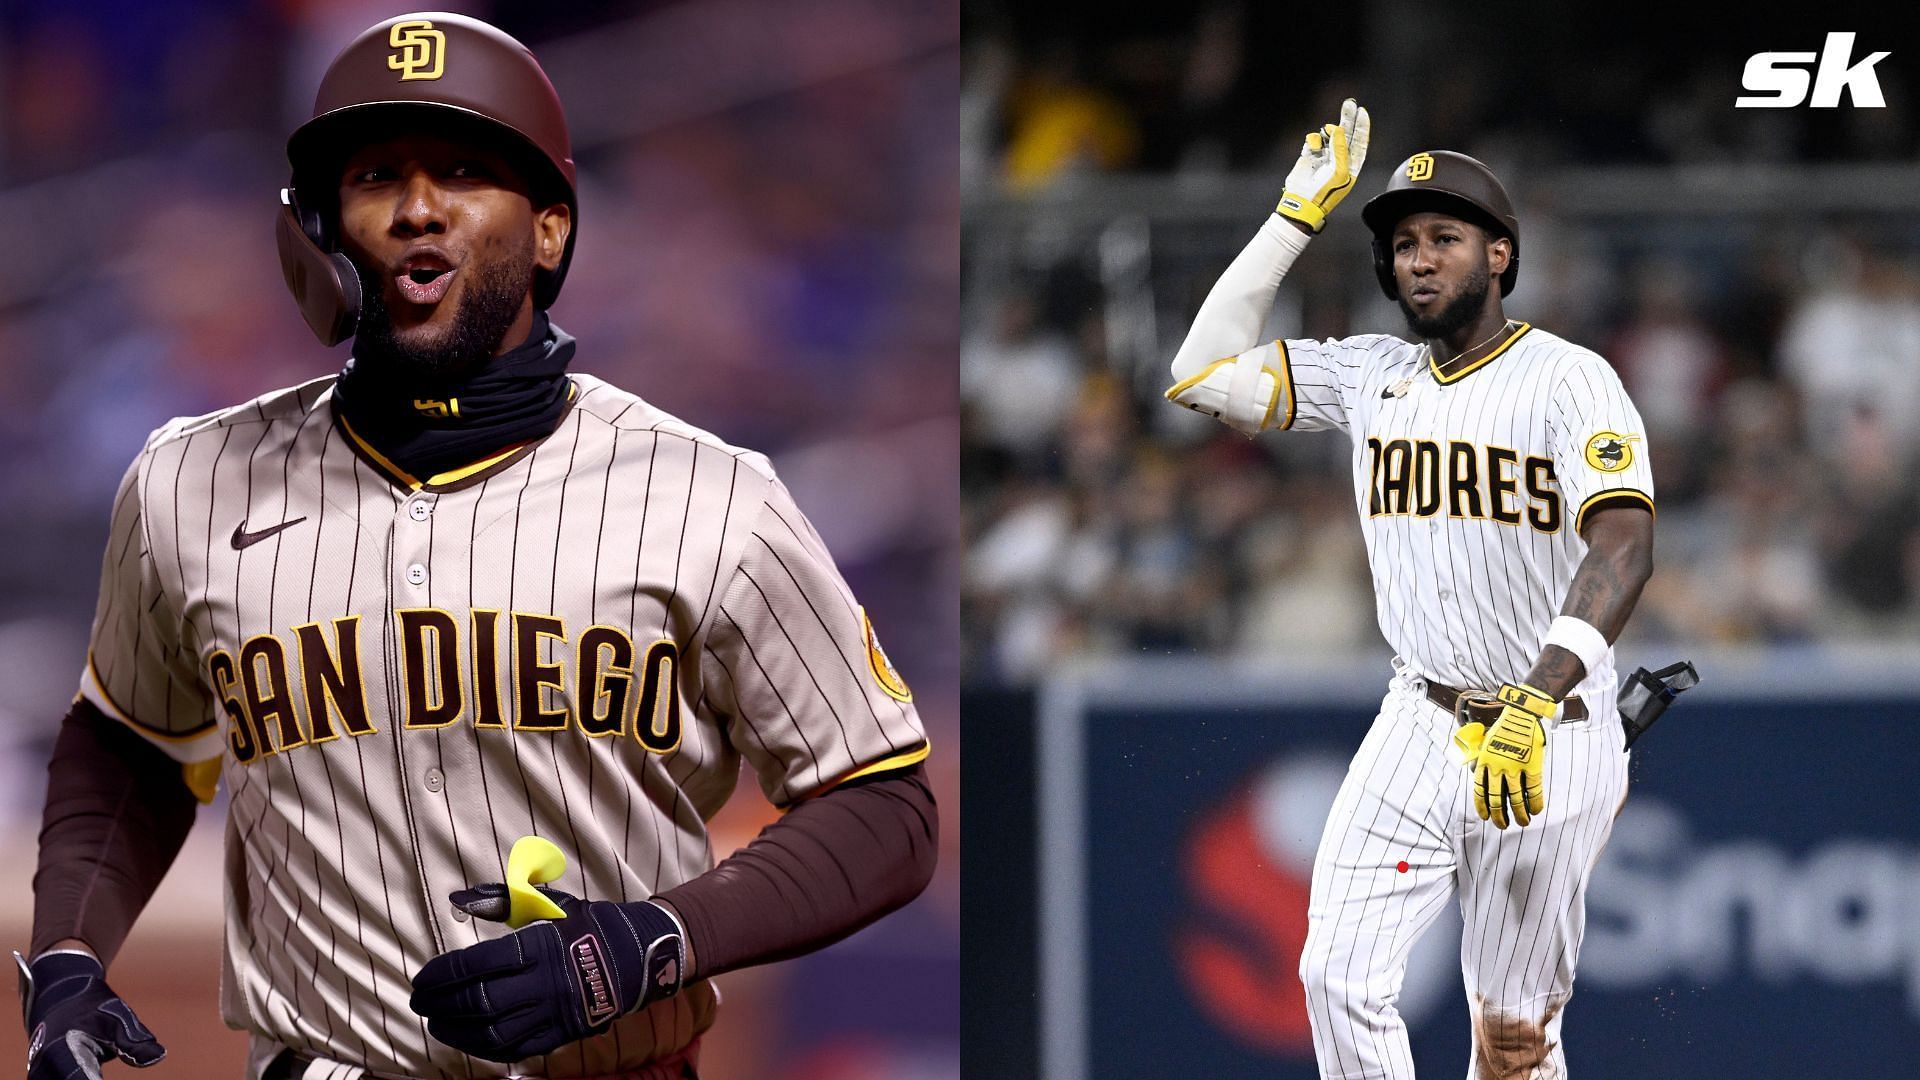 Padres fans do not seem to be too happy about Jurickson Profar